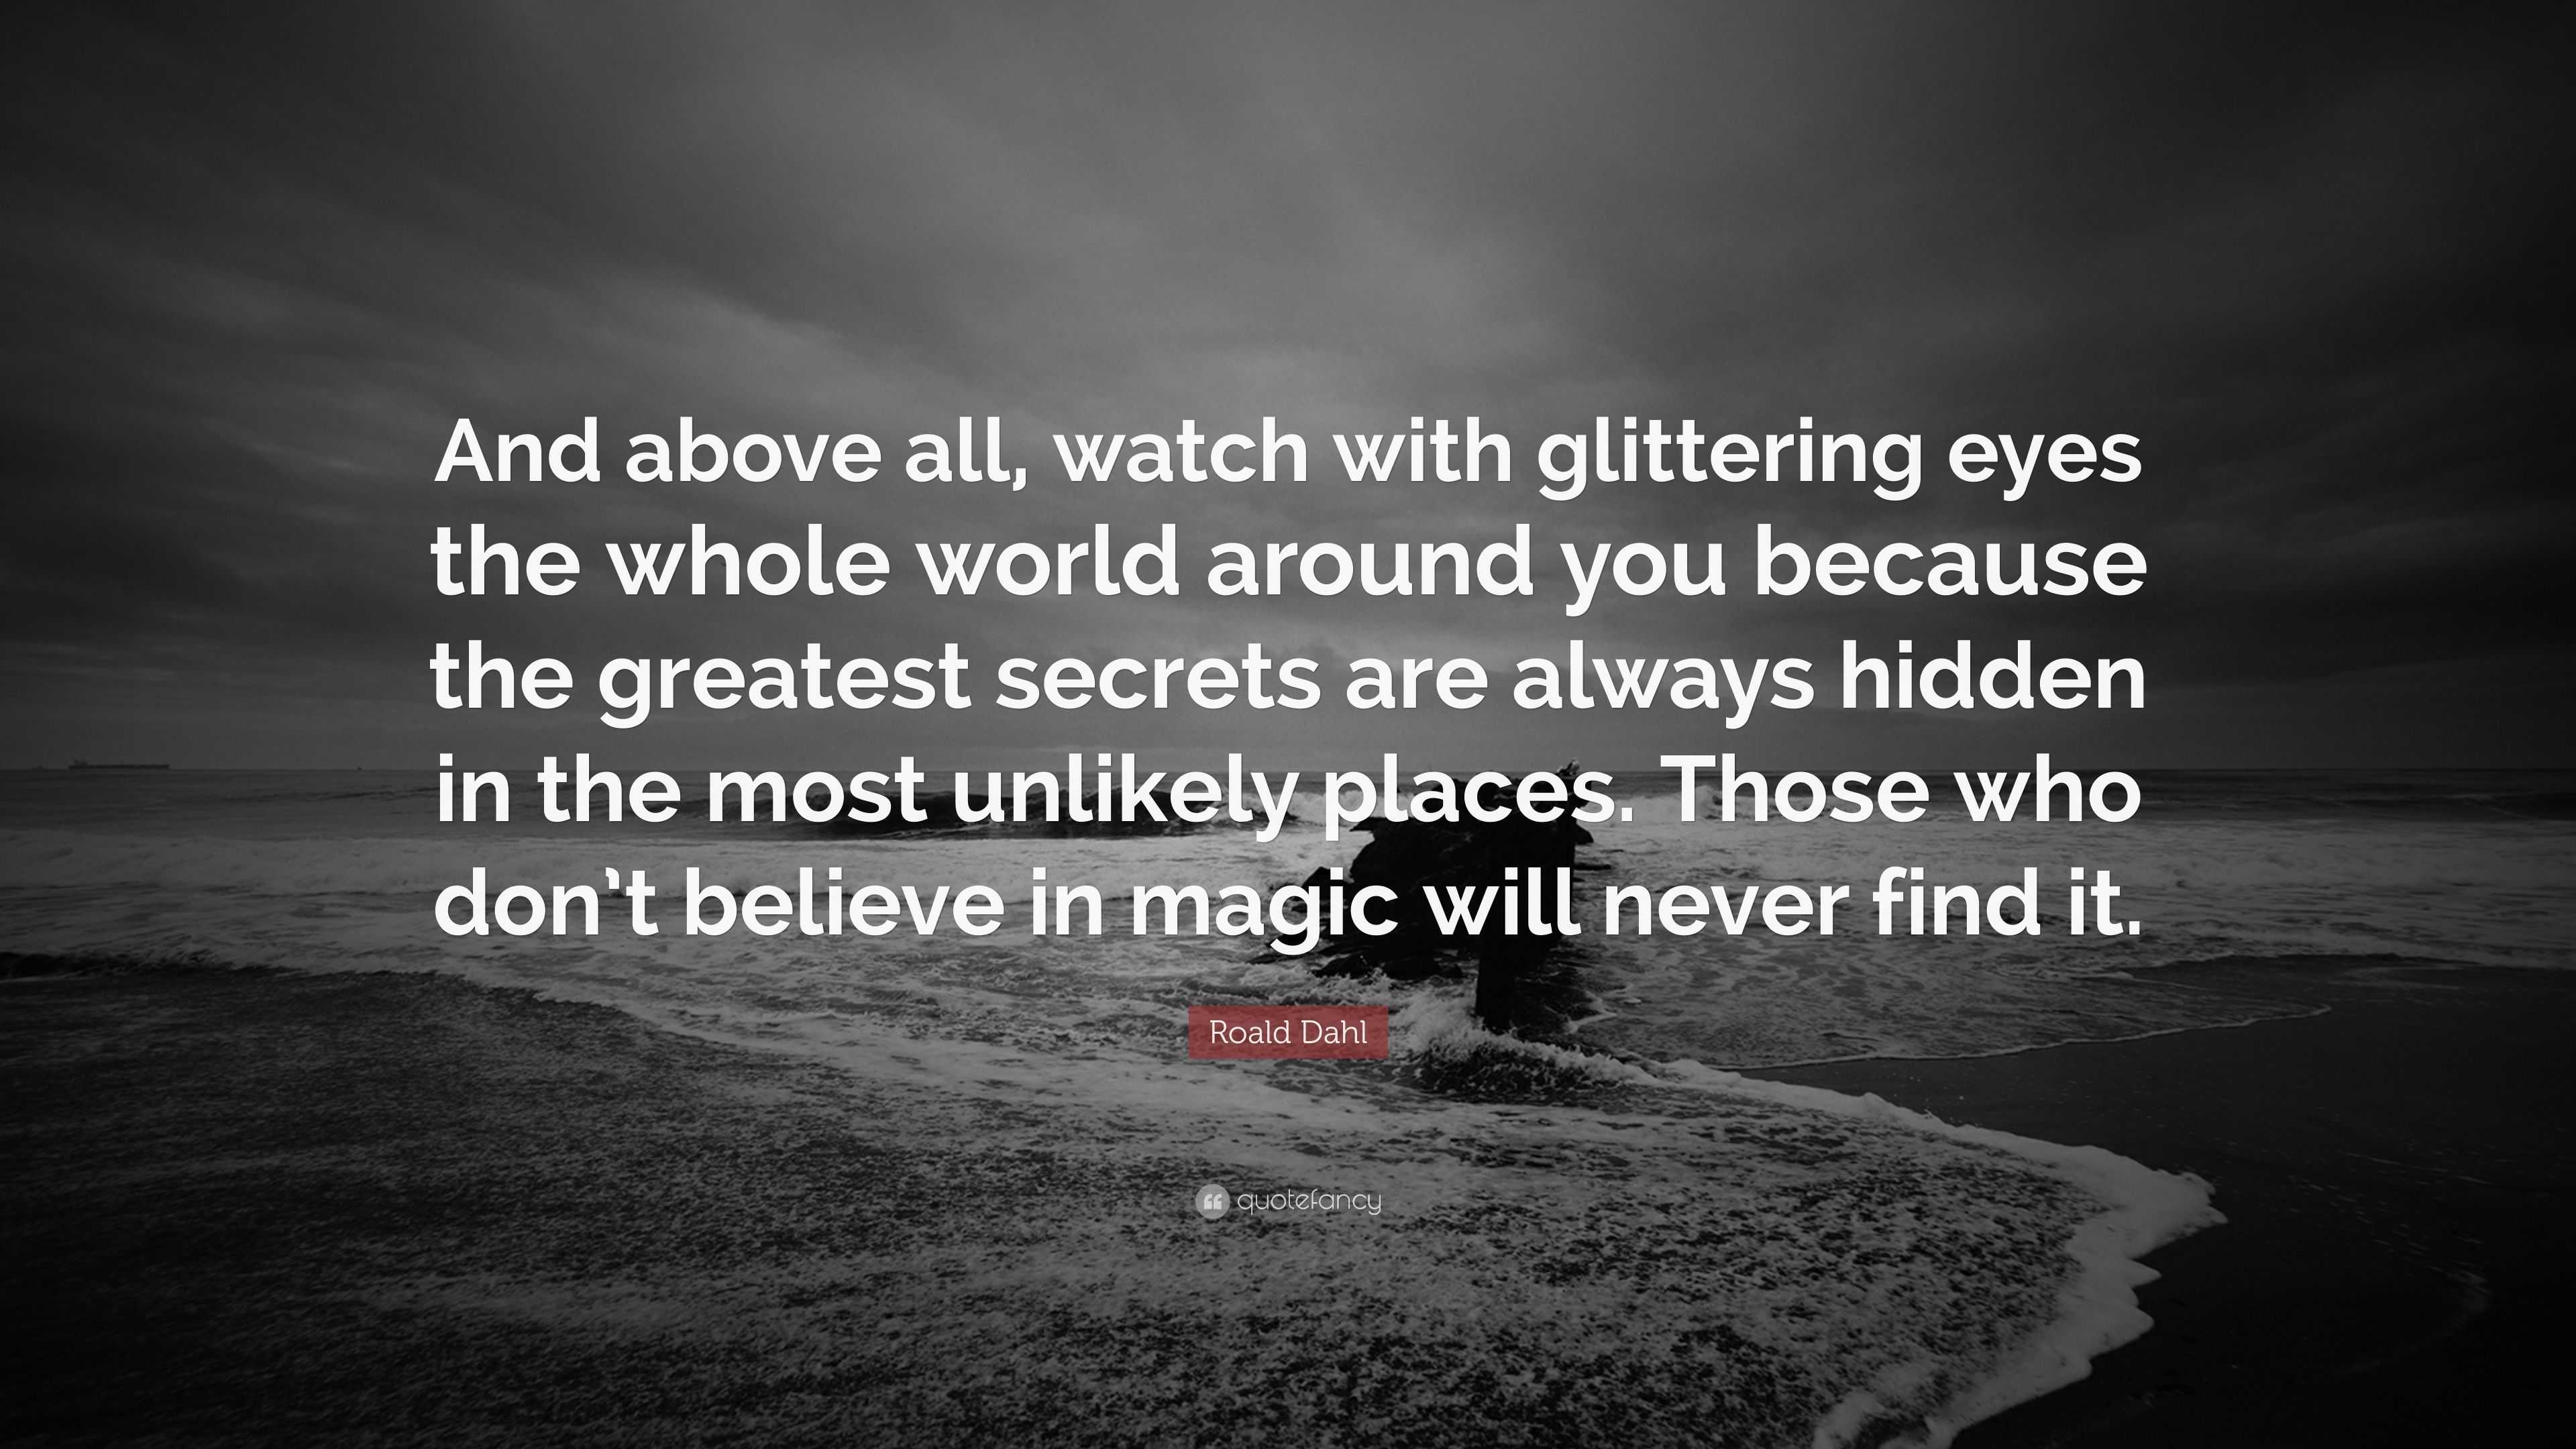 Roald Dahl Quote: “And above all, watch with glittering eyes the whole